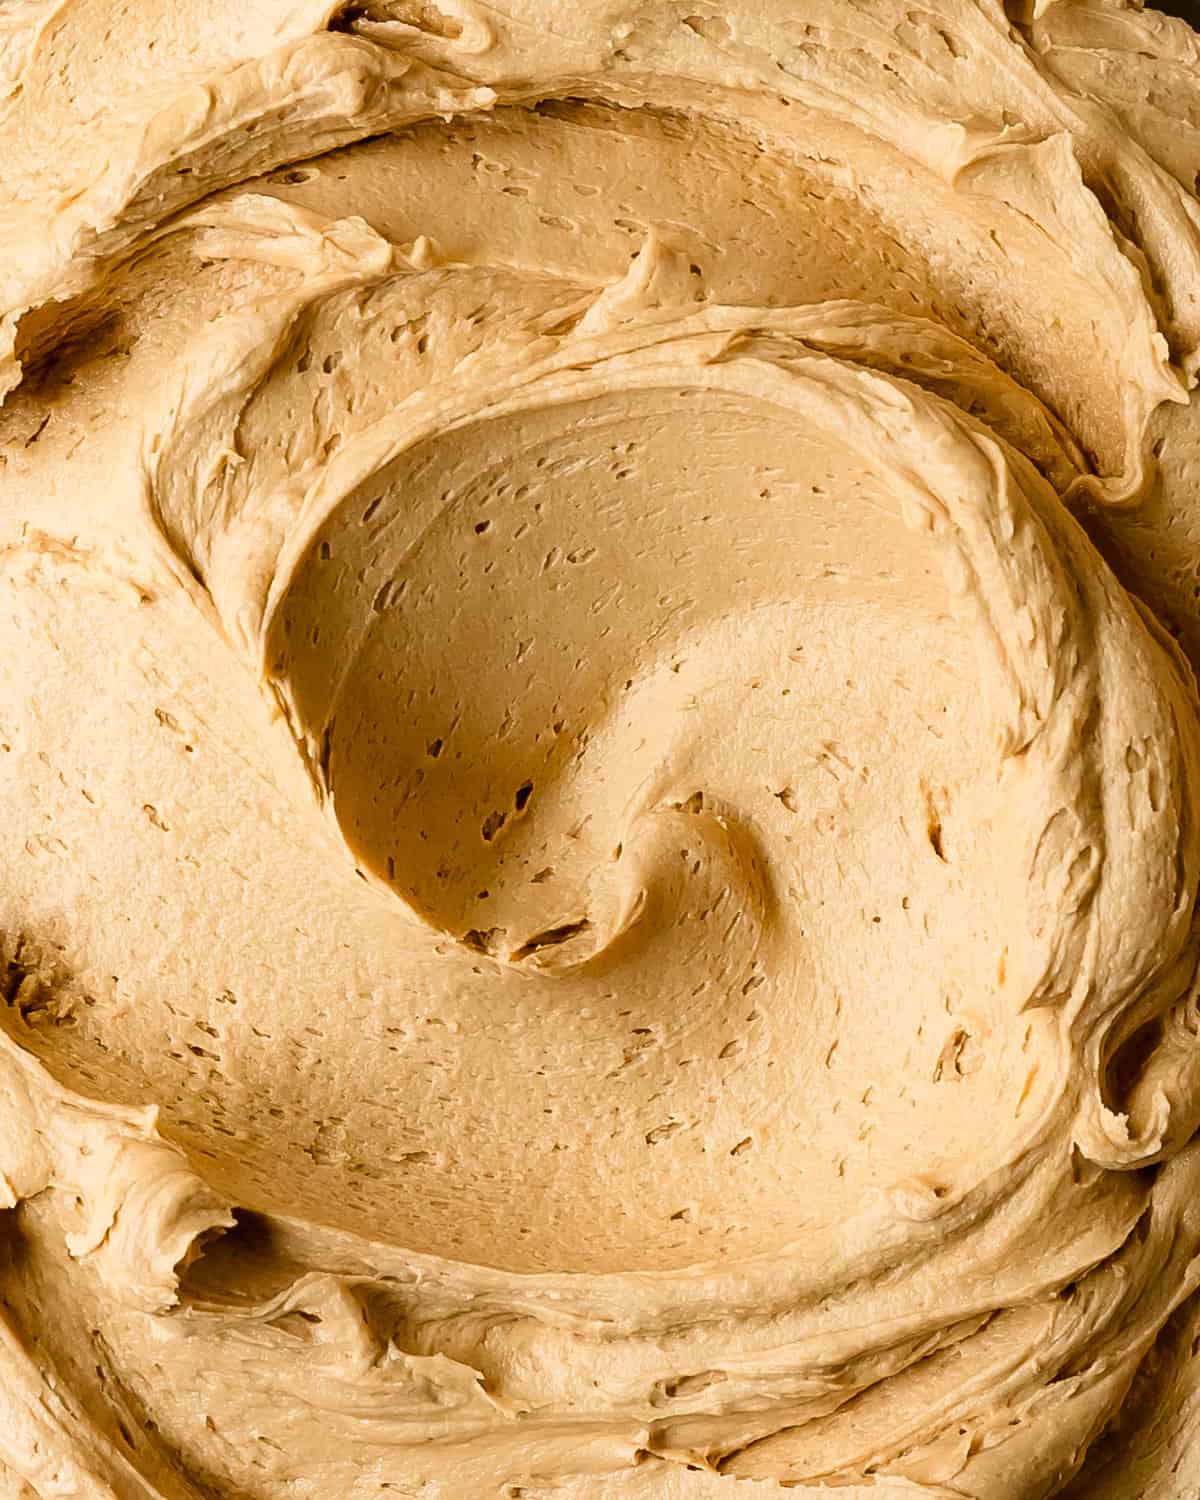 Coffee buttercream is a rich, sweet and creamy coffee flavored frosting that’s perfect for cakes, cupcakes or just to enjoy by the spoonful. Make this easy coffee frosting in about 5 minutes or less using 5 simple ingredients.